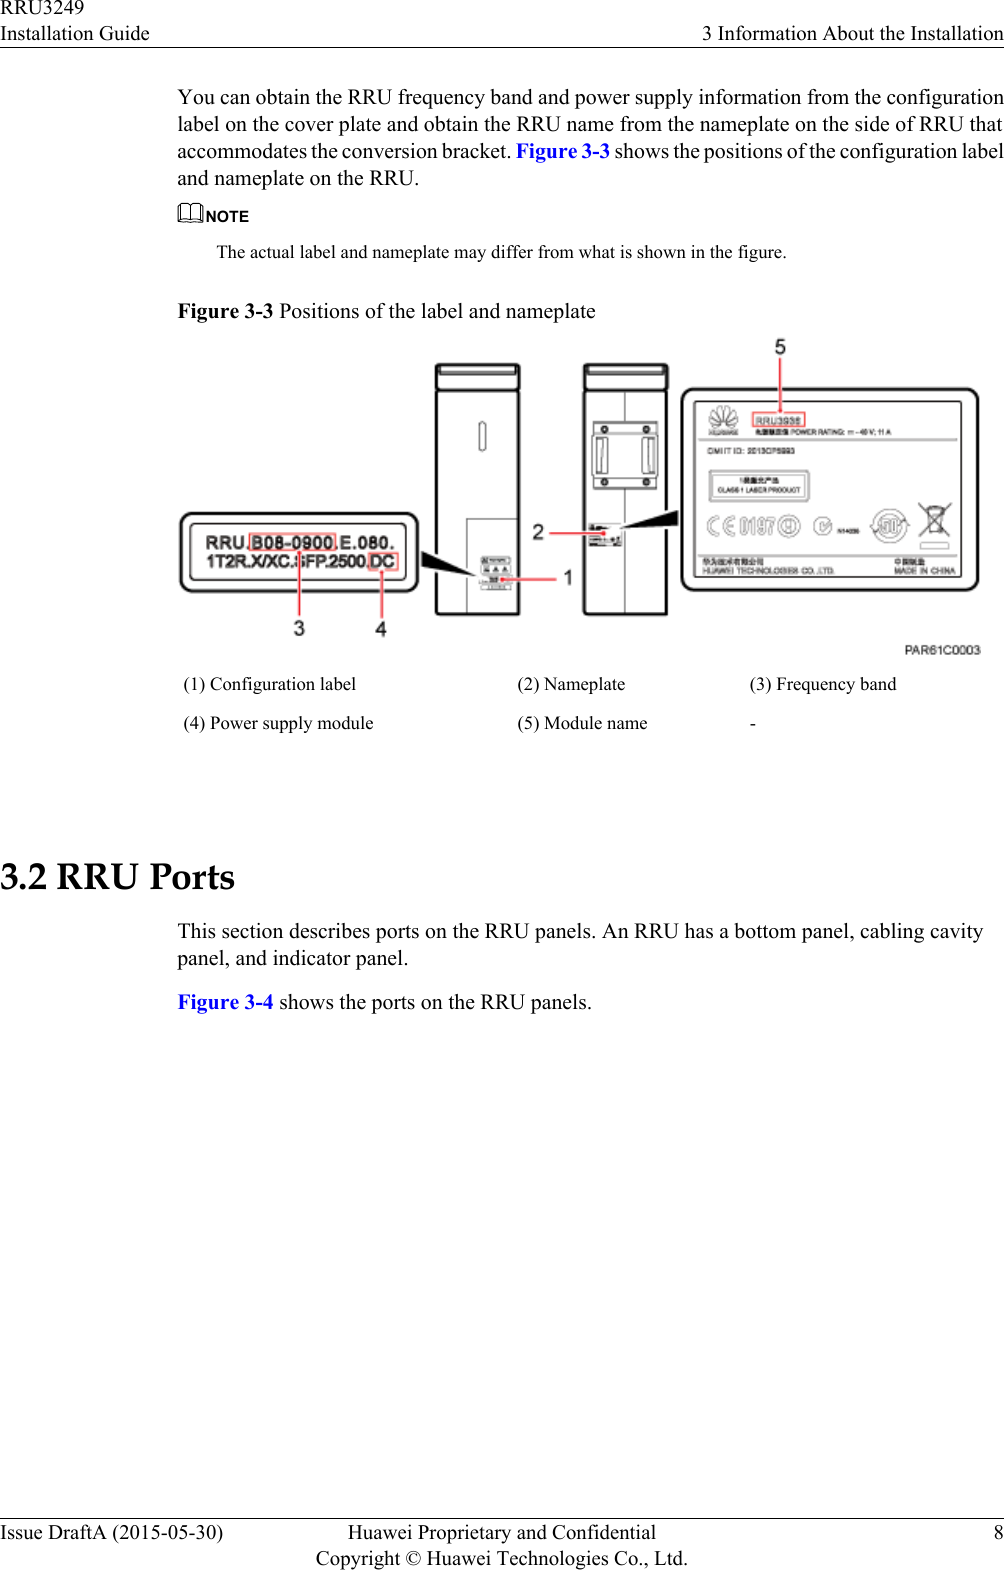 You can obtain the RRU frequency band and power supply information from the configurationlabel on the cover plate and obtain the RRU name from the nameplate on the side of RRU thataccommodates the conversion bracket. Figure 3-3 shows the positions of the configuration labeland nameplate on the RRU.NOTEThe actual label and nameplate may differ from what is shown in the figure.Figure 3-3 Positions of the label and nameplate(1) Configuration label (2) Nameplate (3) Frequency band(4) Power supply module (5) Module name - 3.2 RRU PortsThis section describes ports on the RRU panels. An RRU has a bottom panel, cabling cavitypanel, and indicator panel.Figure 3-4 shows the ports on the RRU panels.RRU3249Installation Guide 3 Information About the InstallationIssue DraftA (2015-05-30) Huawei Proprietary and ConfidentialCopyright © Huawei Technologies Co., Ltd.8